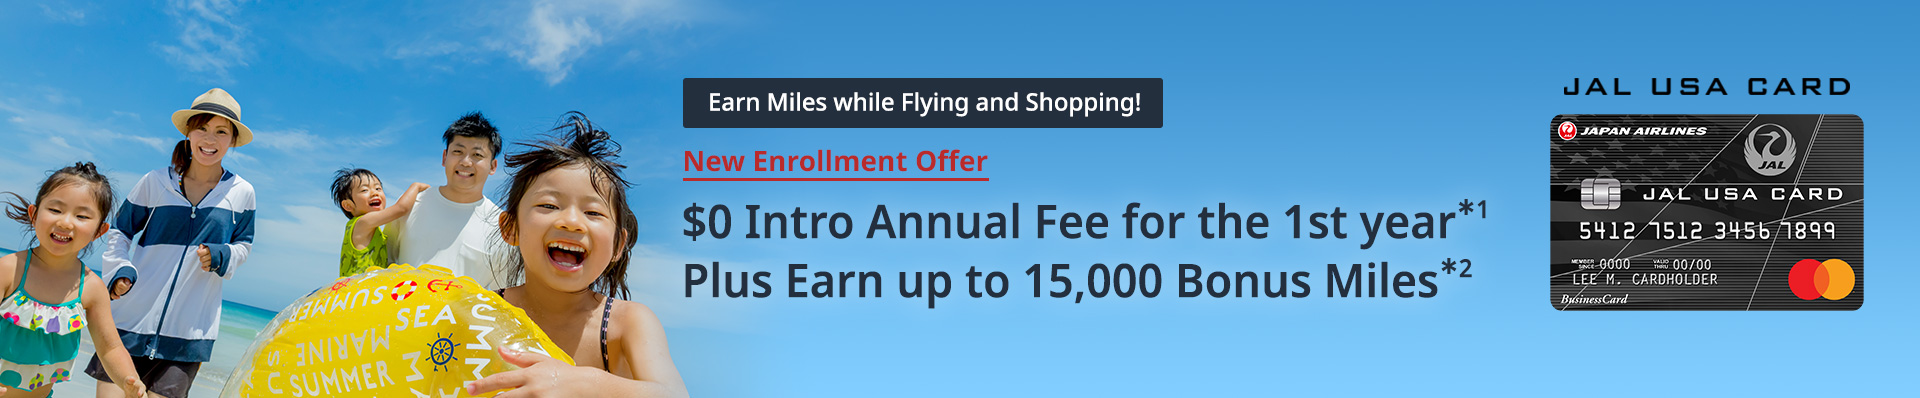 Earn Miles while Flying and Shopping! New Enrollment Offer. $0 Intro Annual Fee for the 1st year*1. Plus Earn up to 15,000 Bonus Miles*2